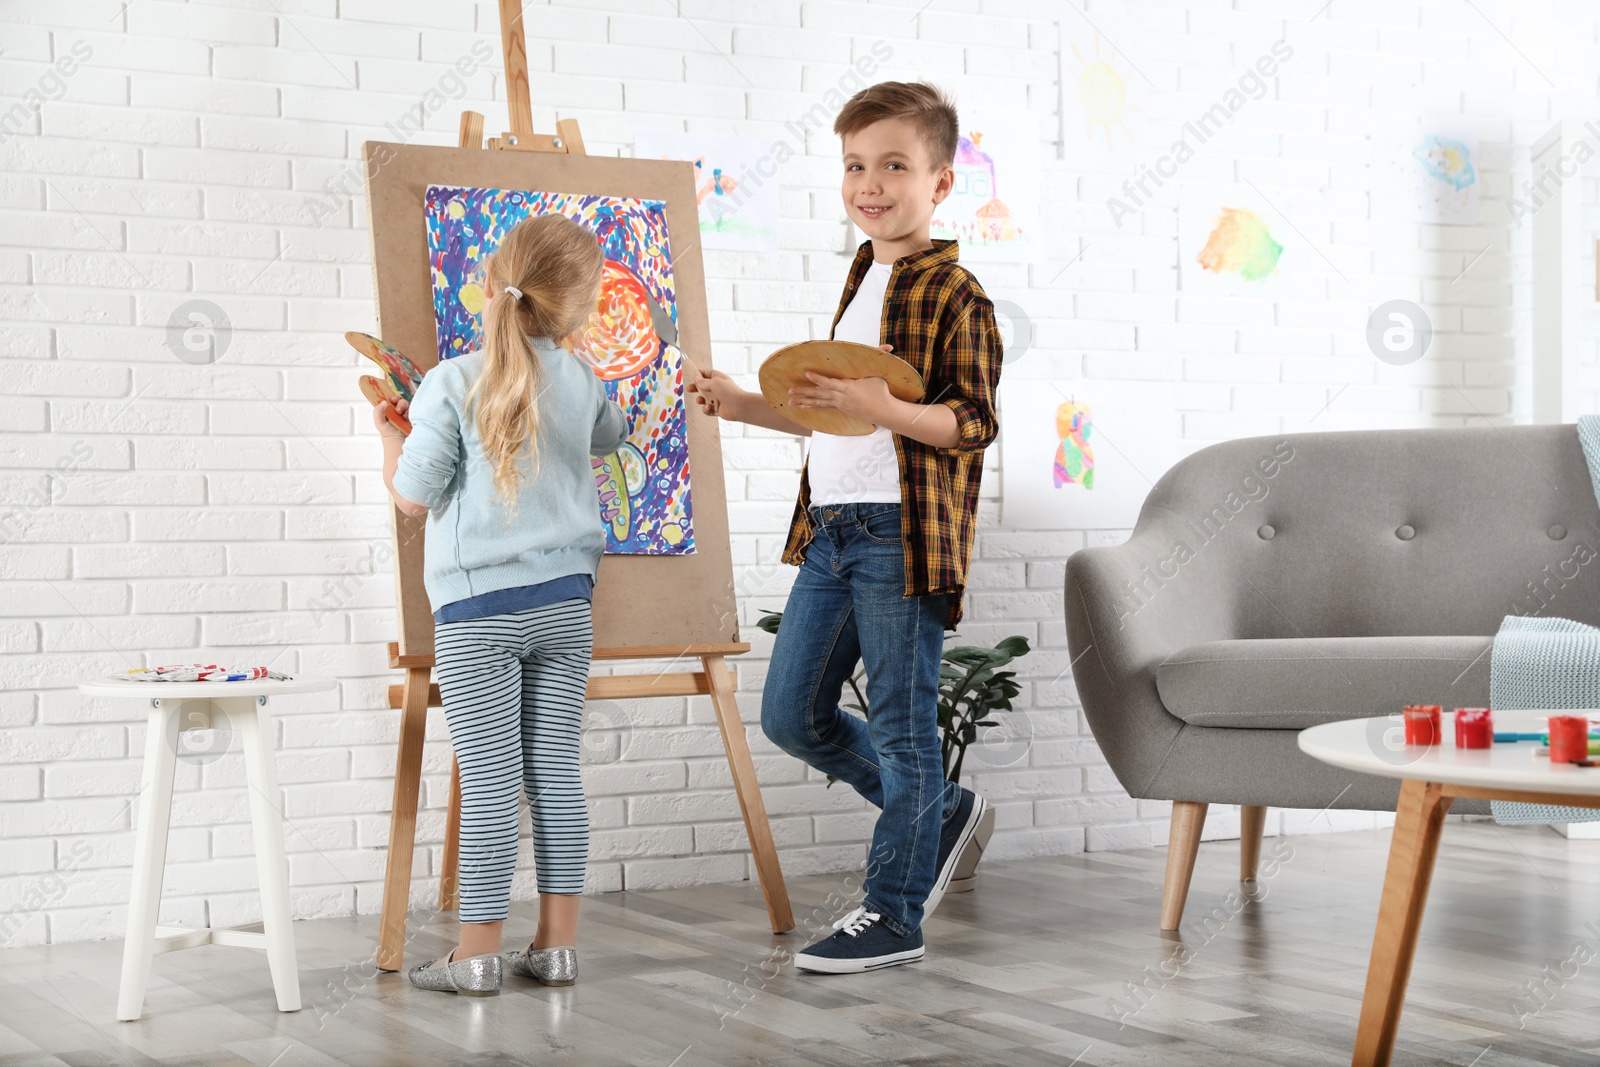 Photo of Cute little children painting on easel at home